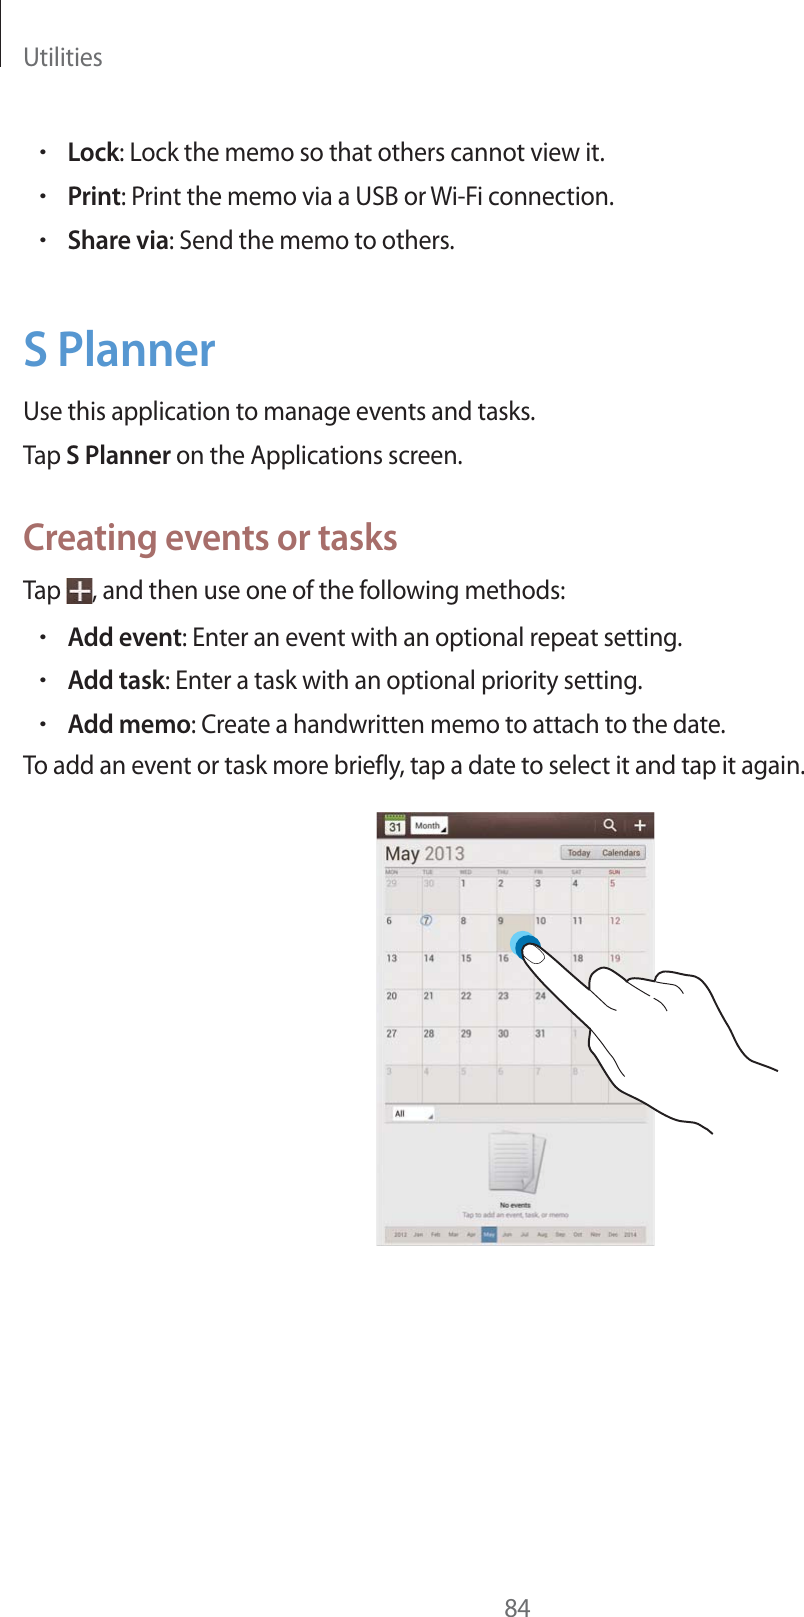 Utilities84rLock: Lock the memo so that others cannot view it.rPrint: Print the memo via a USB or Wi-Fi connection.rShare via: Send the memo to others.S PlannerUse this application to manage events and tasks.Tap S Planner on the Applications screen.Creating events or tasksTap  , and then use one of the following methods:rAdd event: Enter an event with an optional repeat setting.rAdd task: Enter a task with an optional priority setting.rAdd memo: Create a handwritten memo to attach to the date.To add an event or task more briefly, tap a date to select it and tap it again.